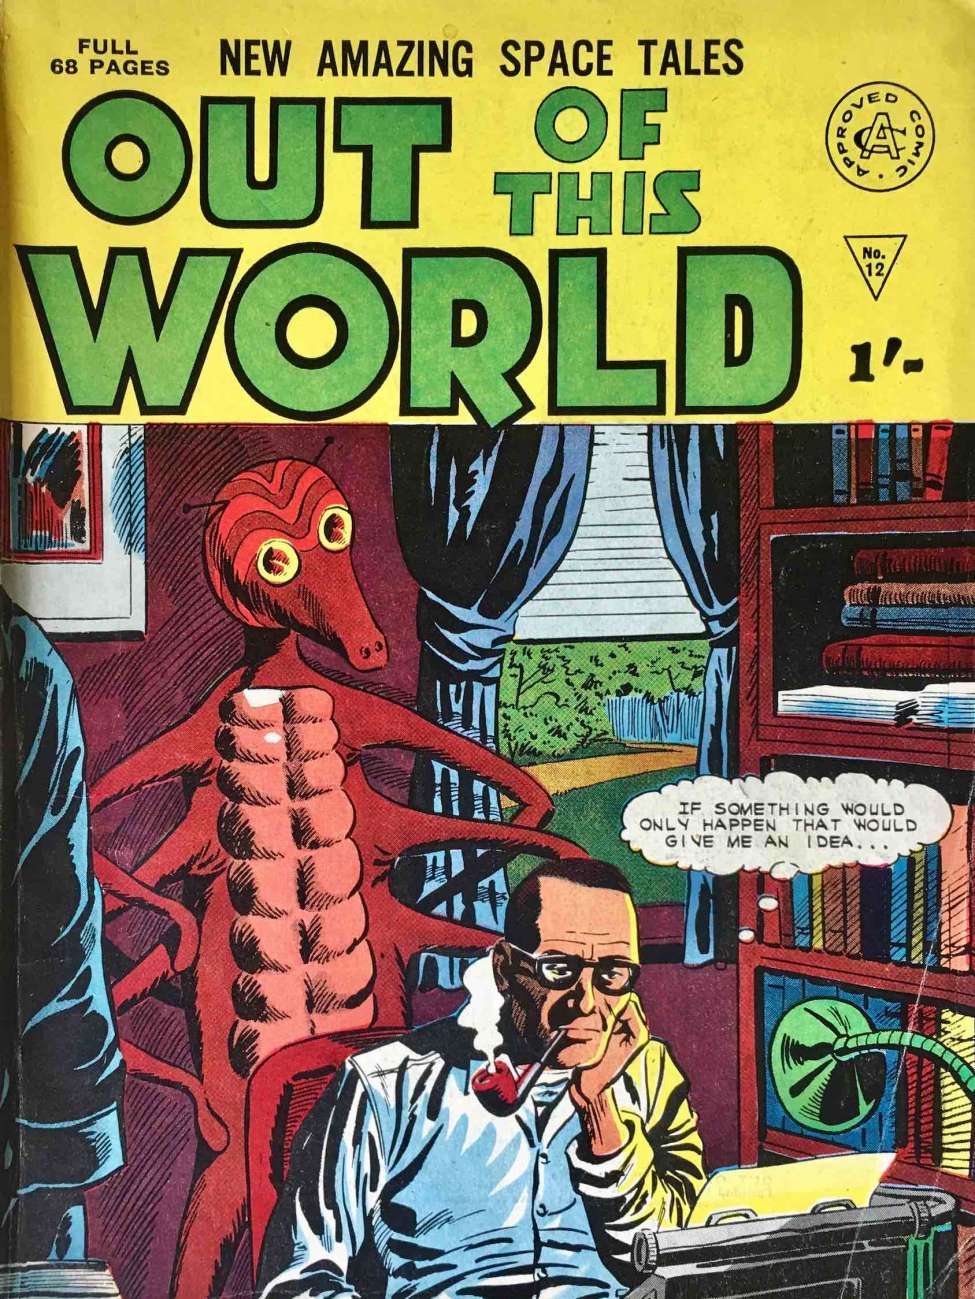 Out of this World 12 (UK Comic Books) - Comic Book Plus